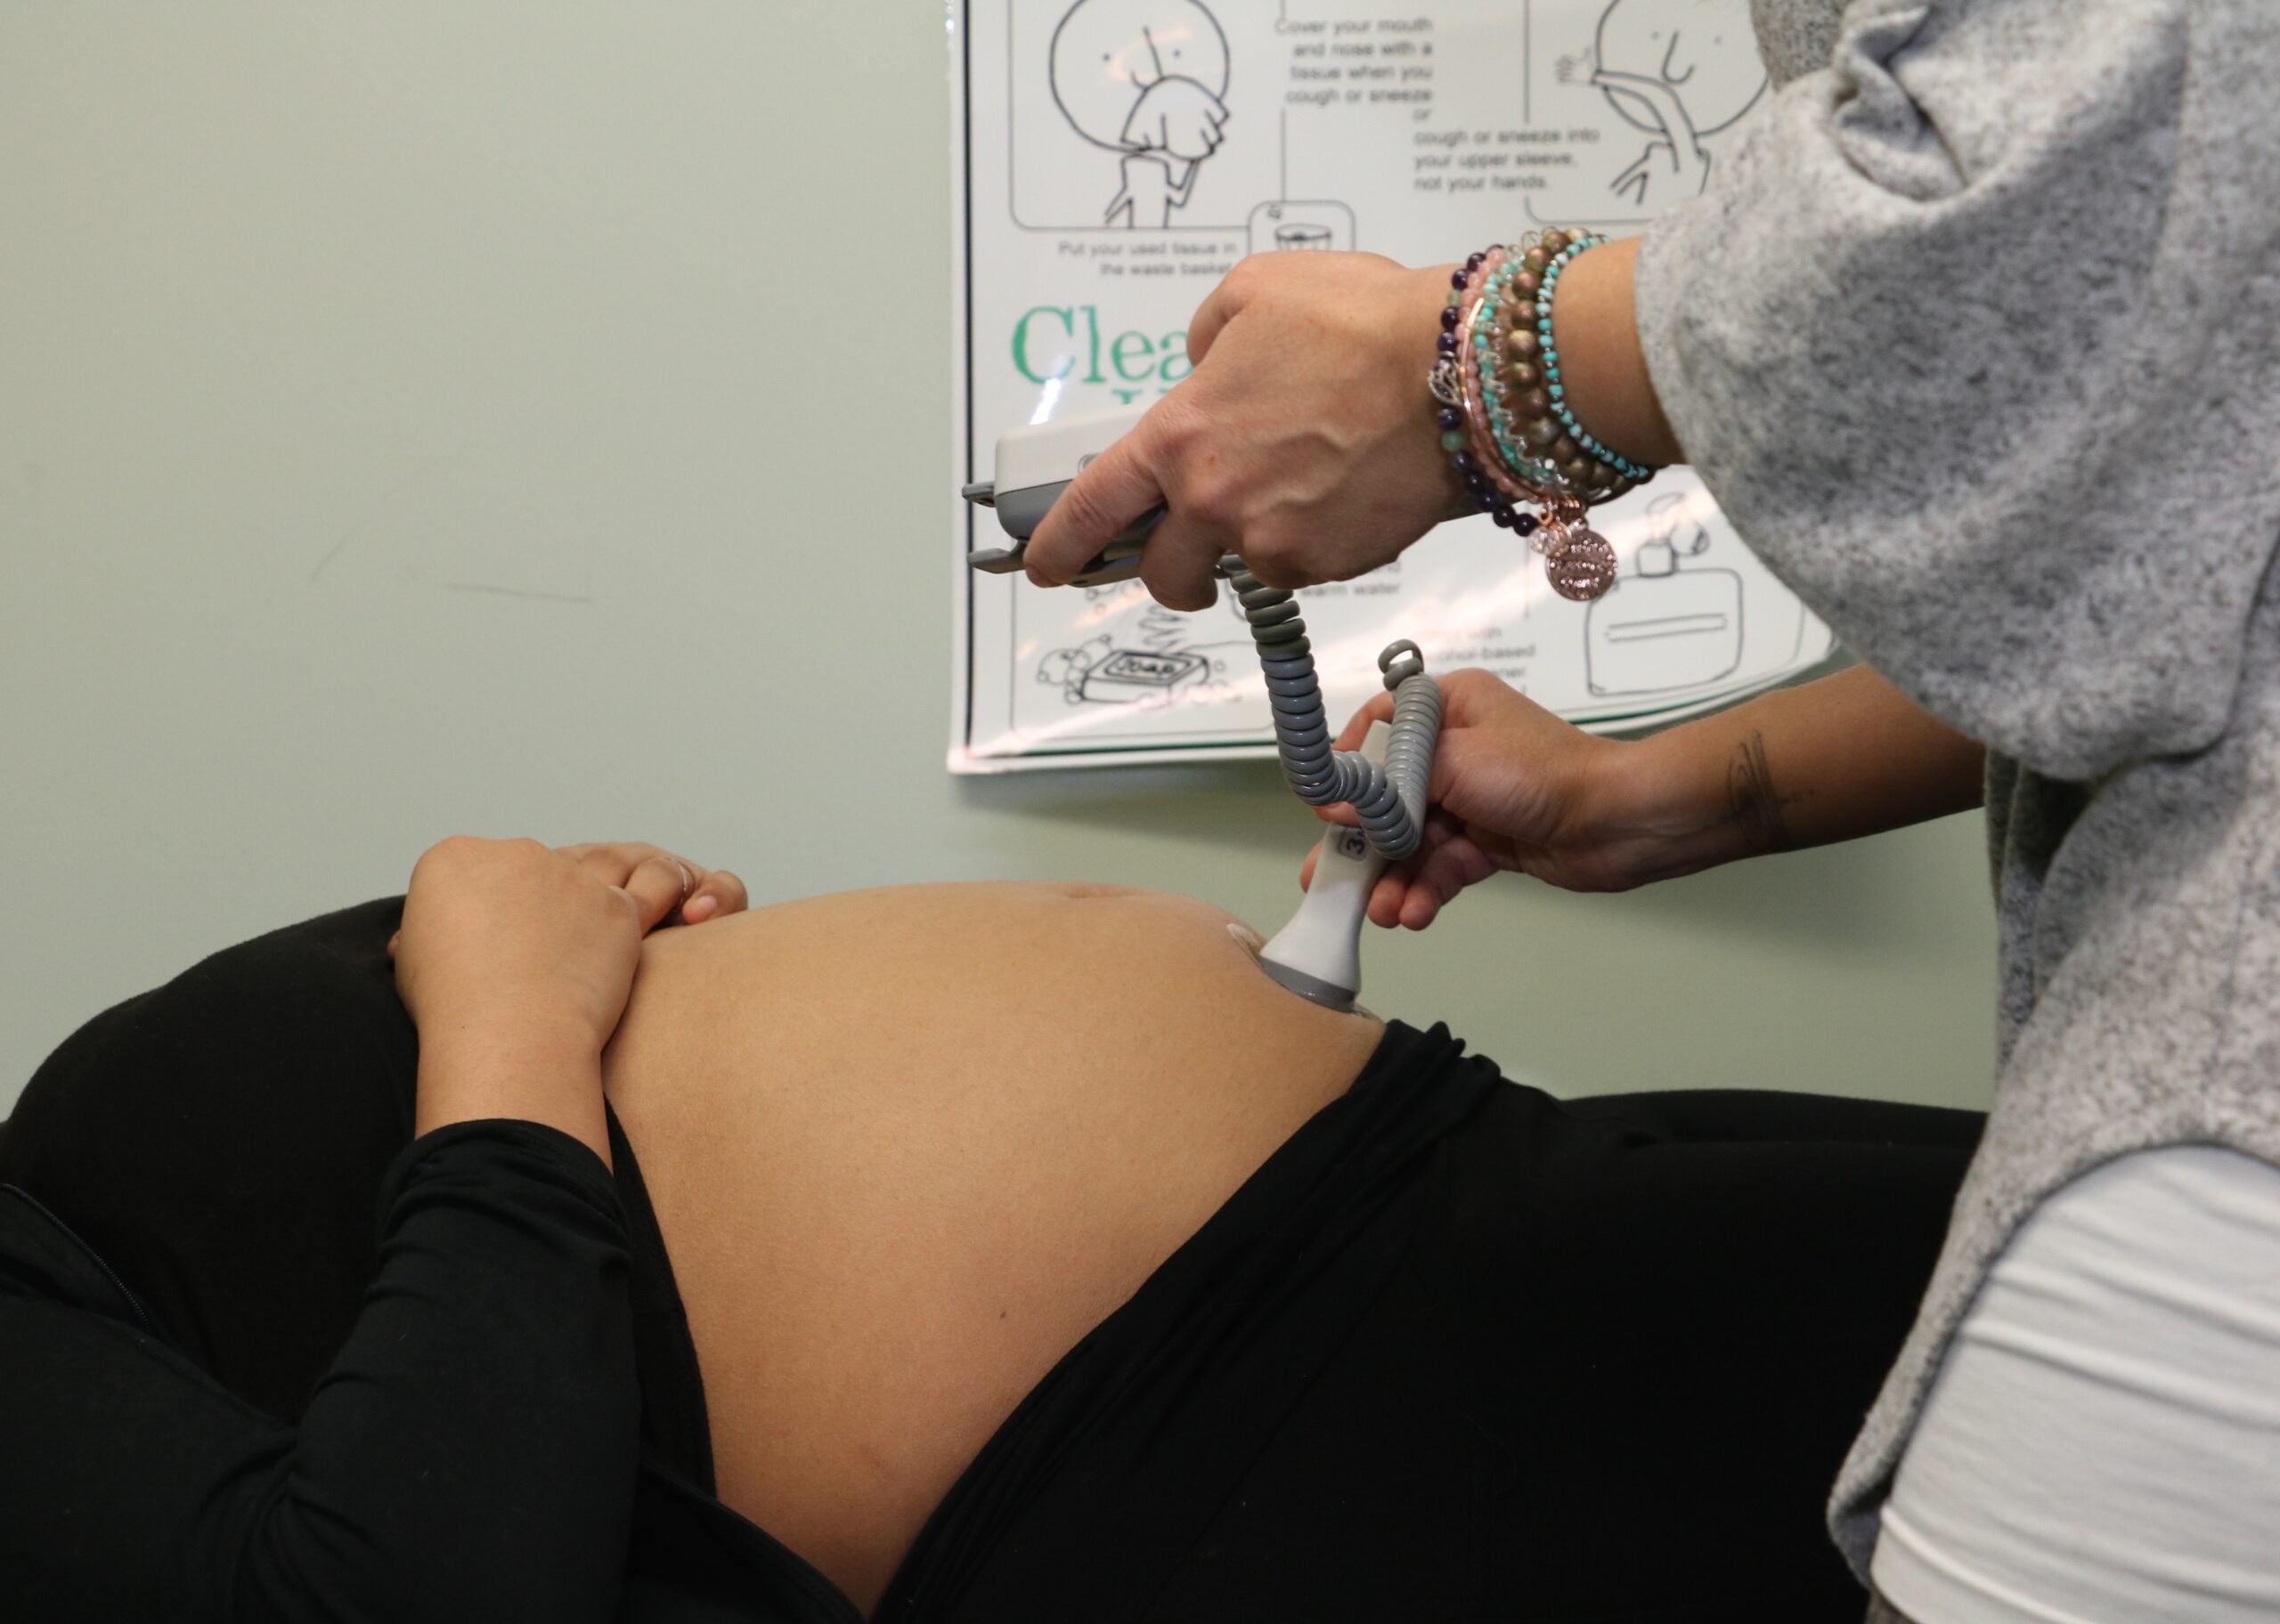 Certified Nurse Midwife, Maj. Nicole Sampson, measures baby's heart rate during the health assessment portion of a Centering Pregnancy session at Blanchfield Army Community Hospital in 2018. Blanchfield is resuming Centering Pregnancy, which brings expectant mothers together in healthcare groups of 8 to 12 women, for 10 two-hour sessions, to share in their prenatal healthcare journey. Each session features a health assessment, interactive learning and community support. U.S. Army photo by Maria Yager.